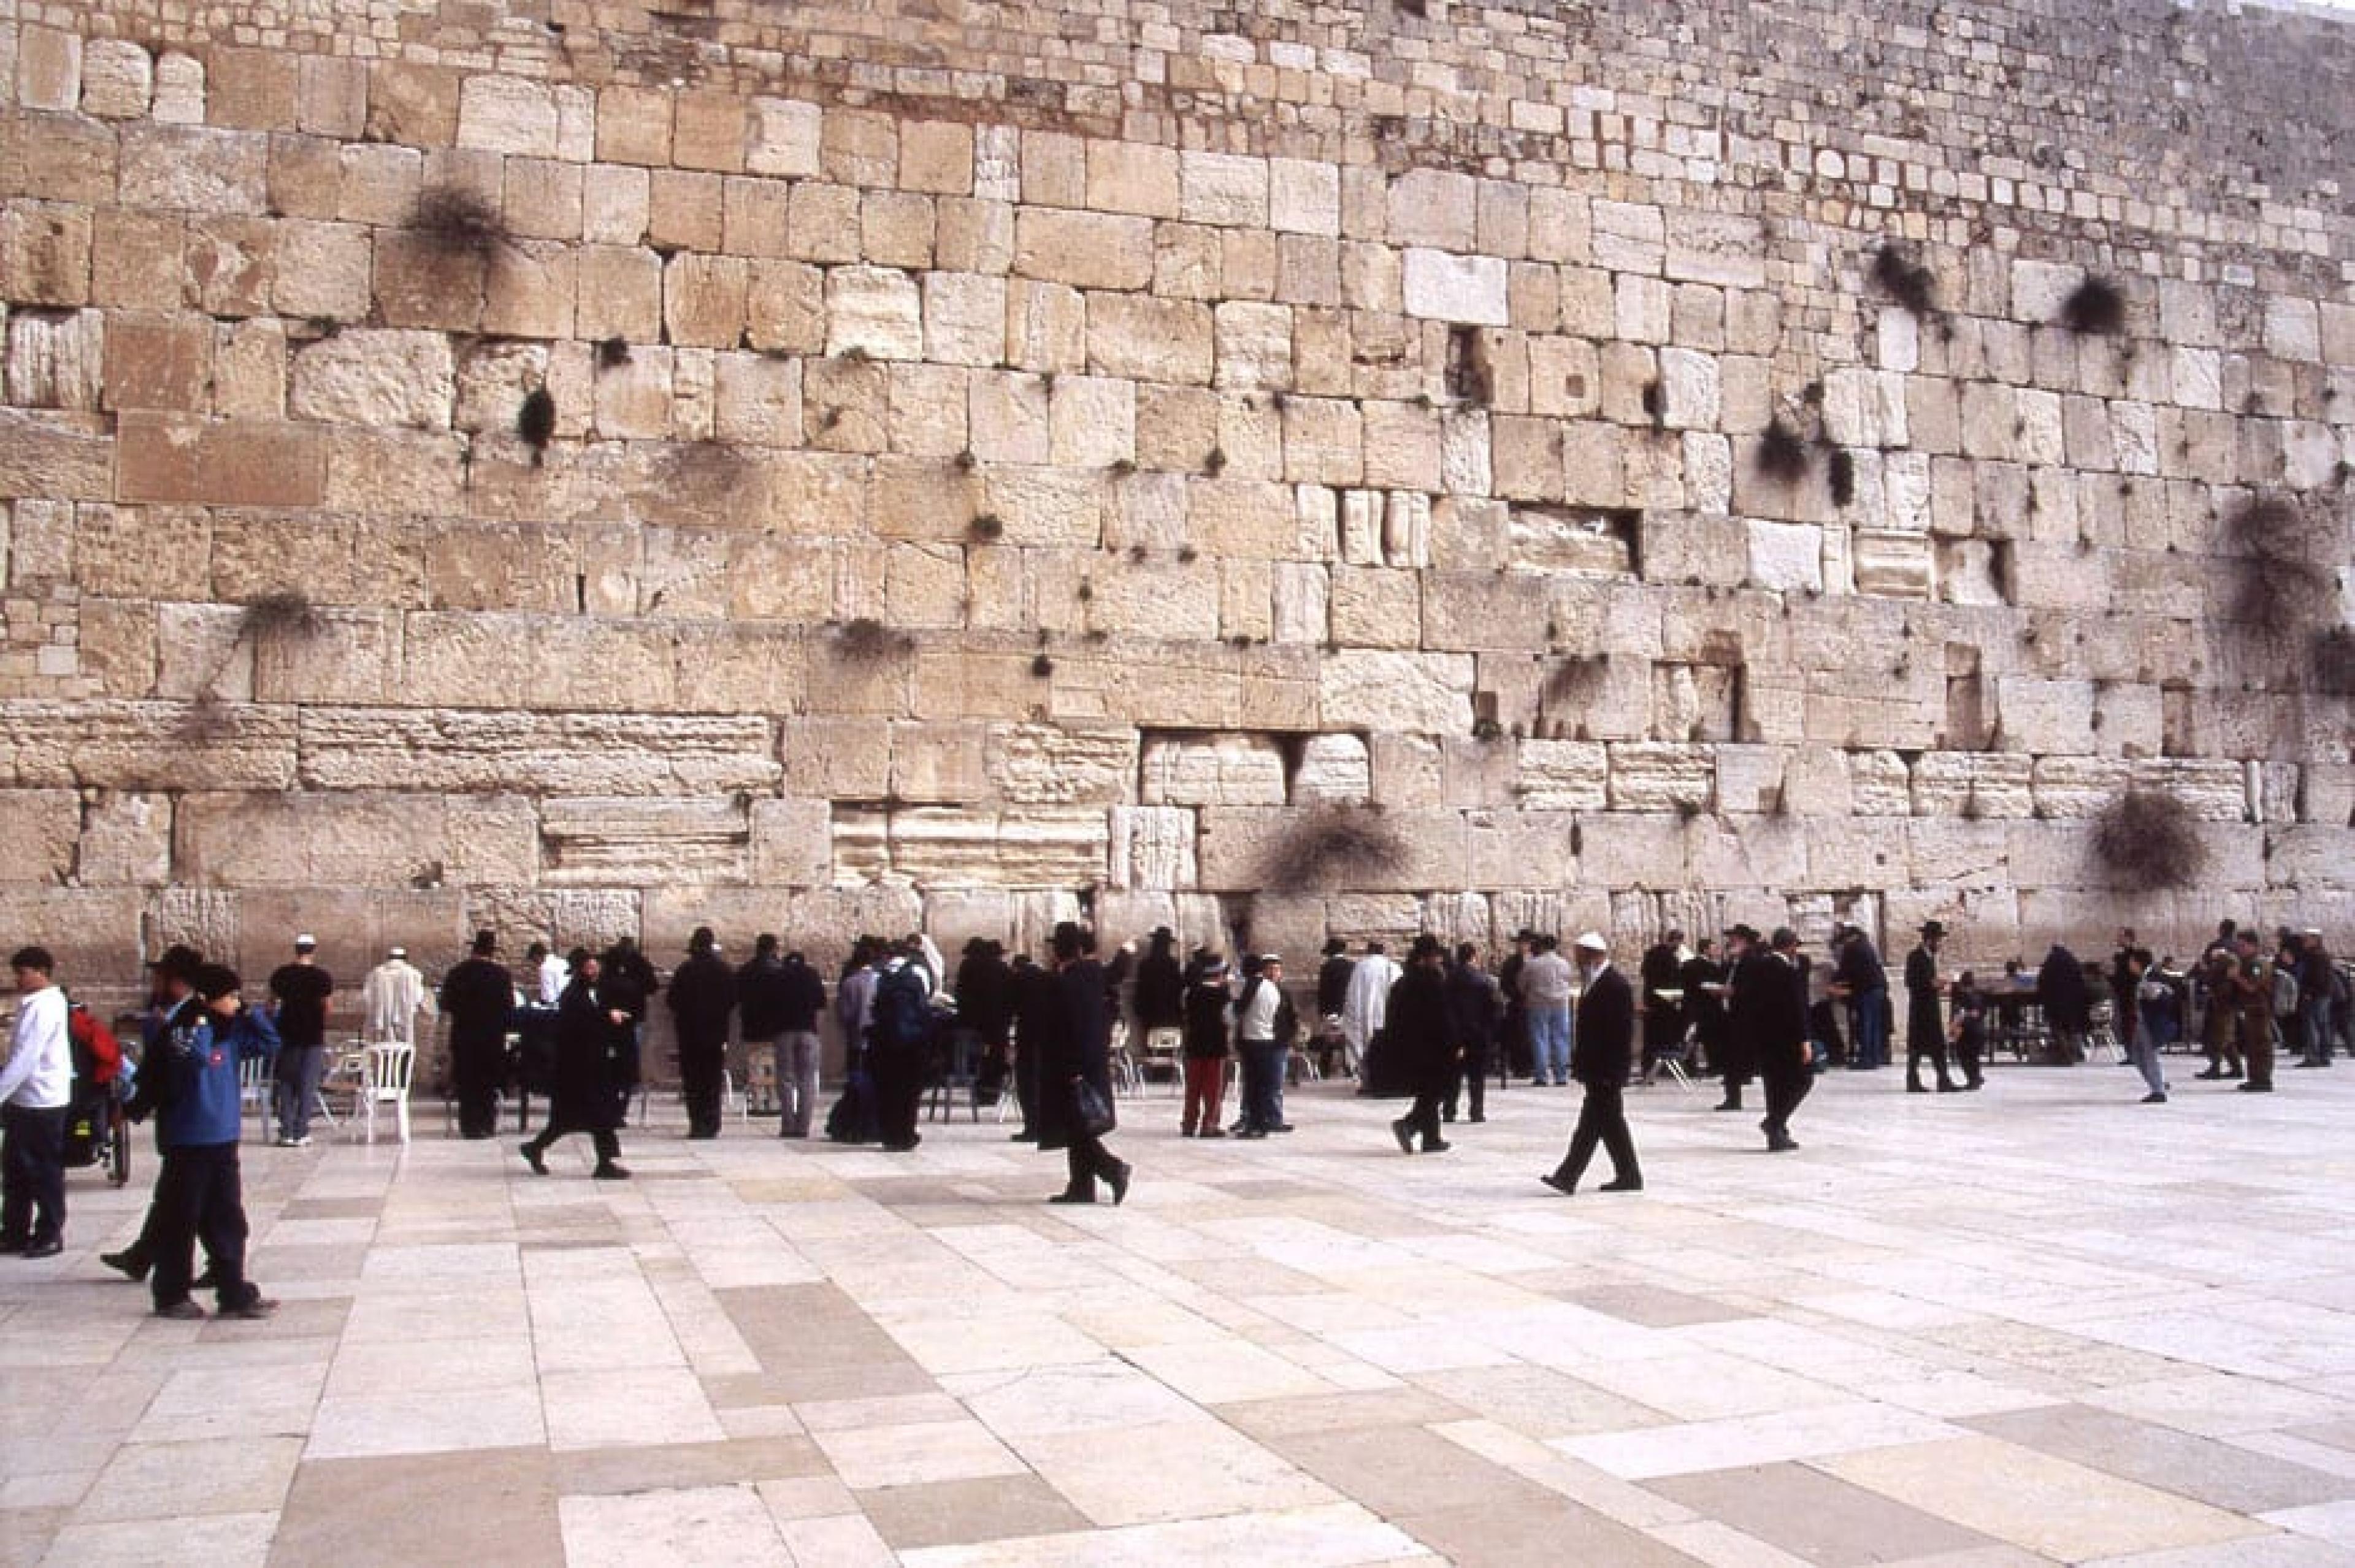 Exterior View - The Western Wall,Jerusalem, Israel - Courtesy of the Israeli Ministry of Tourism